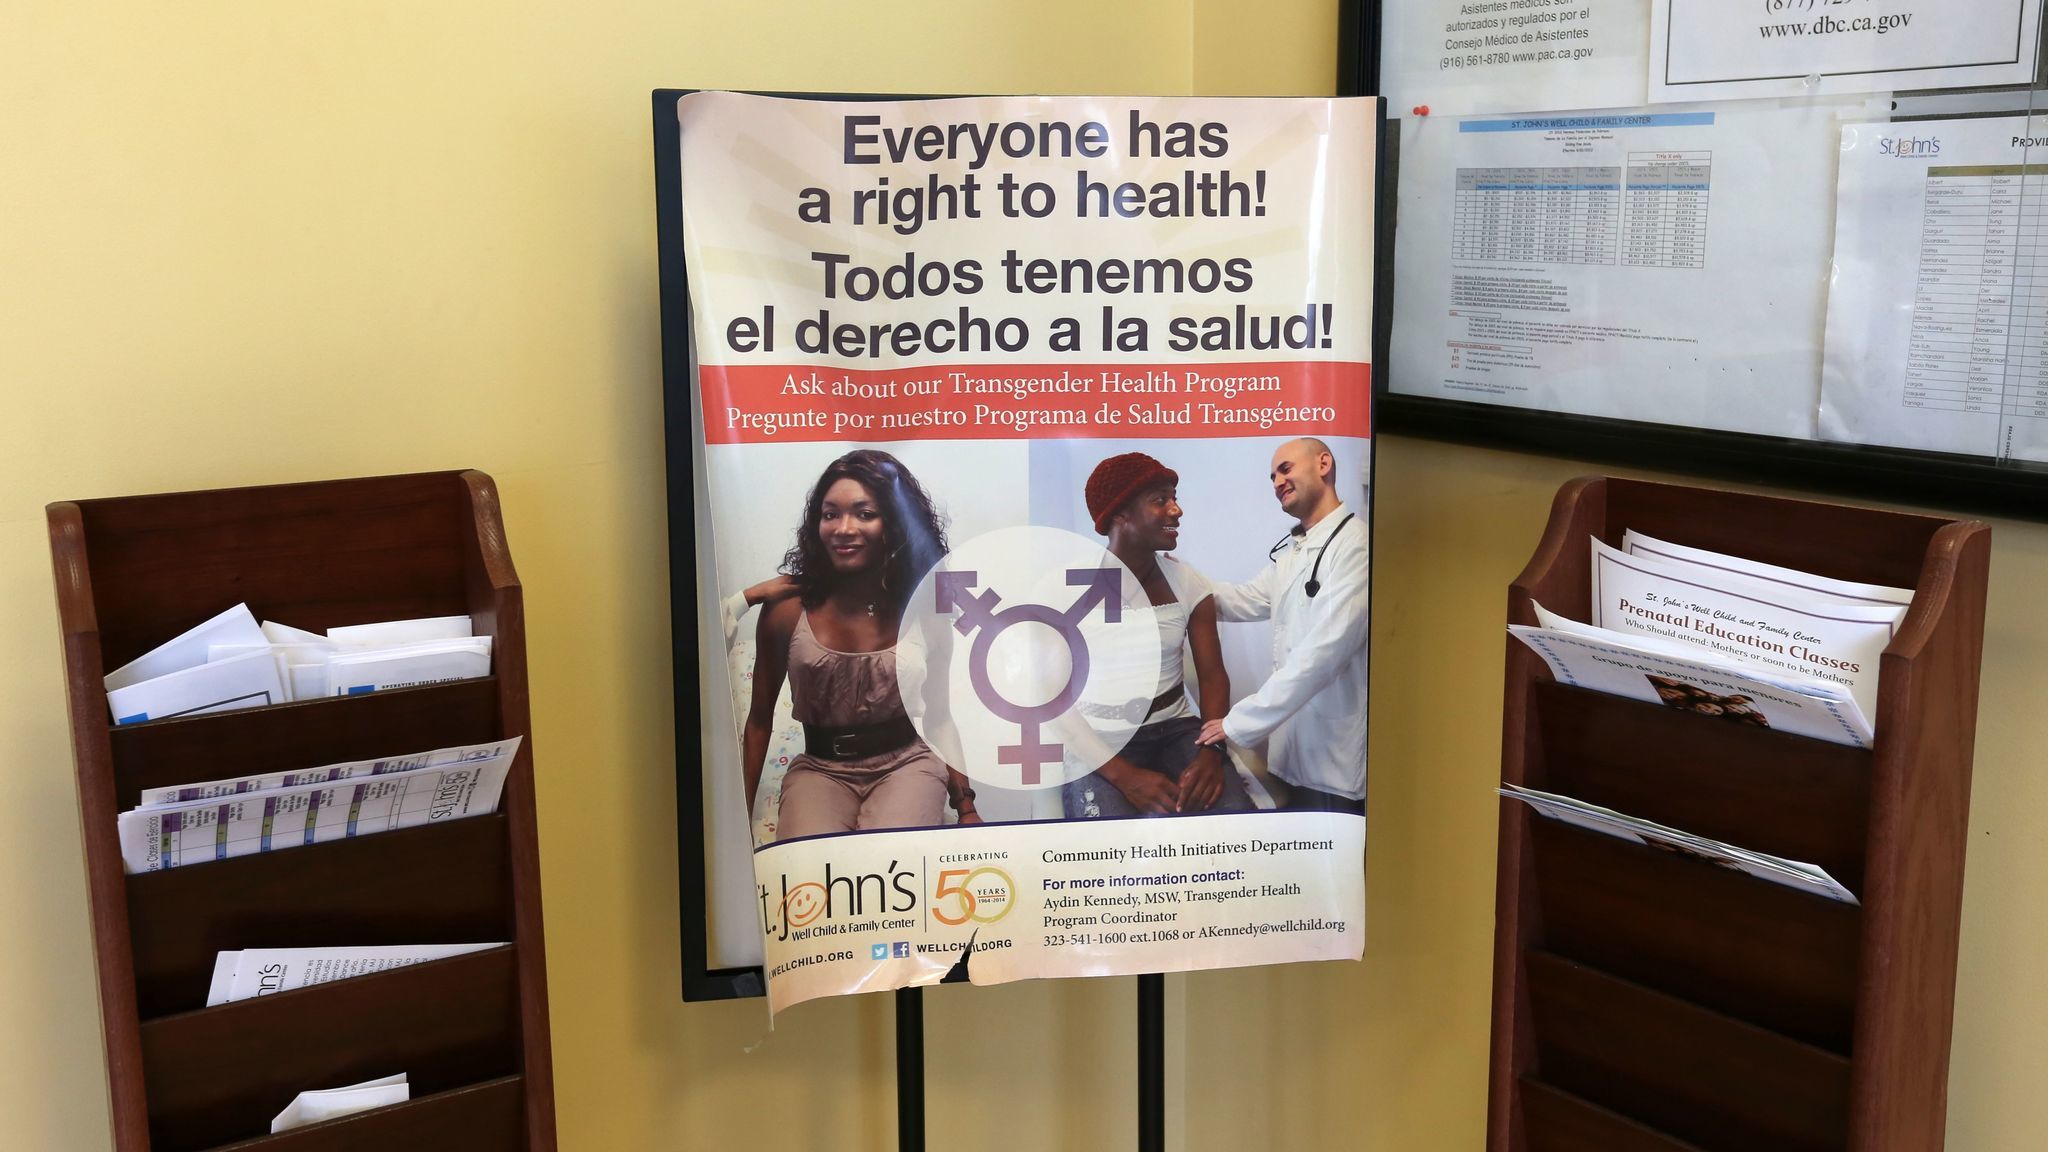 A poster advertises a transgender health program at St. John's in South L.A. The clinic provides culturally appropriate services to the local transgender community, whose members often can't afford the expensive medical care they require.